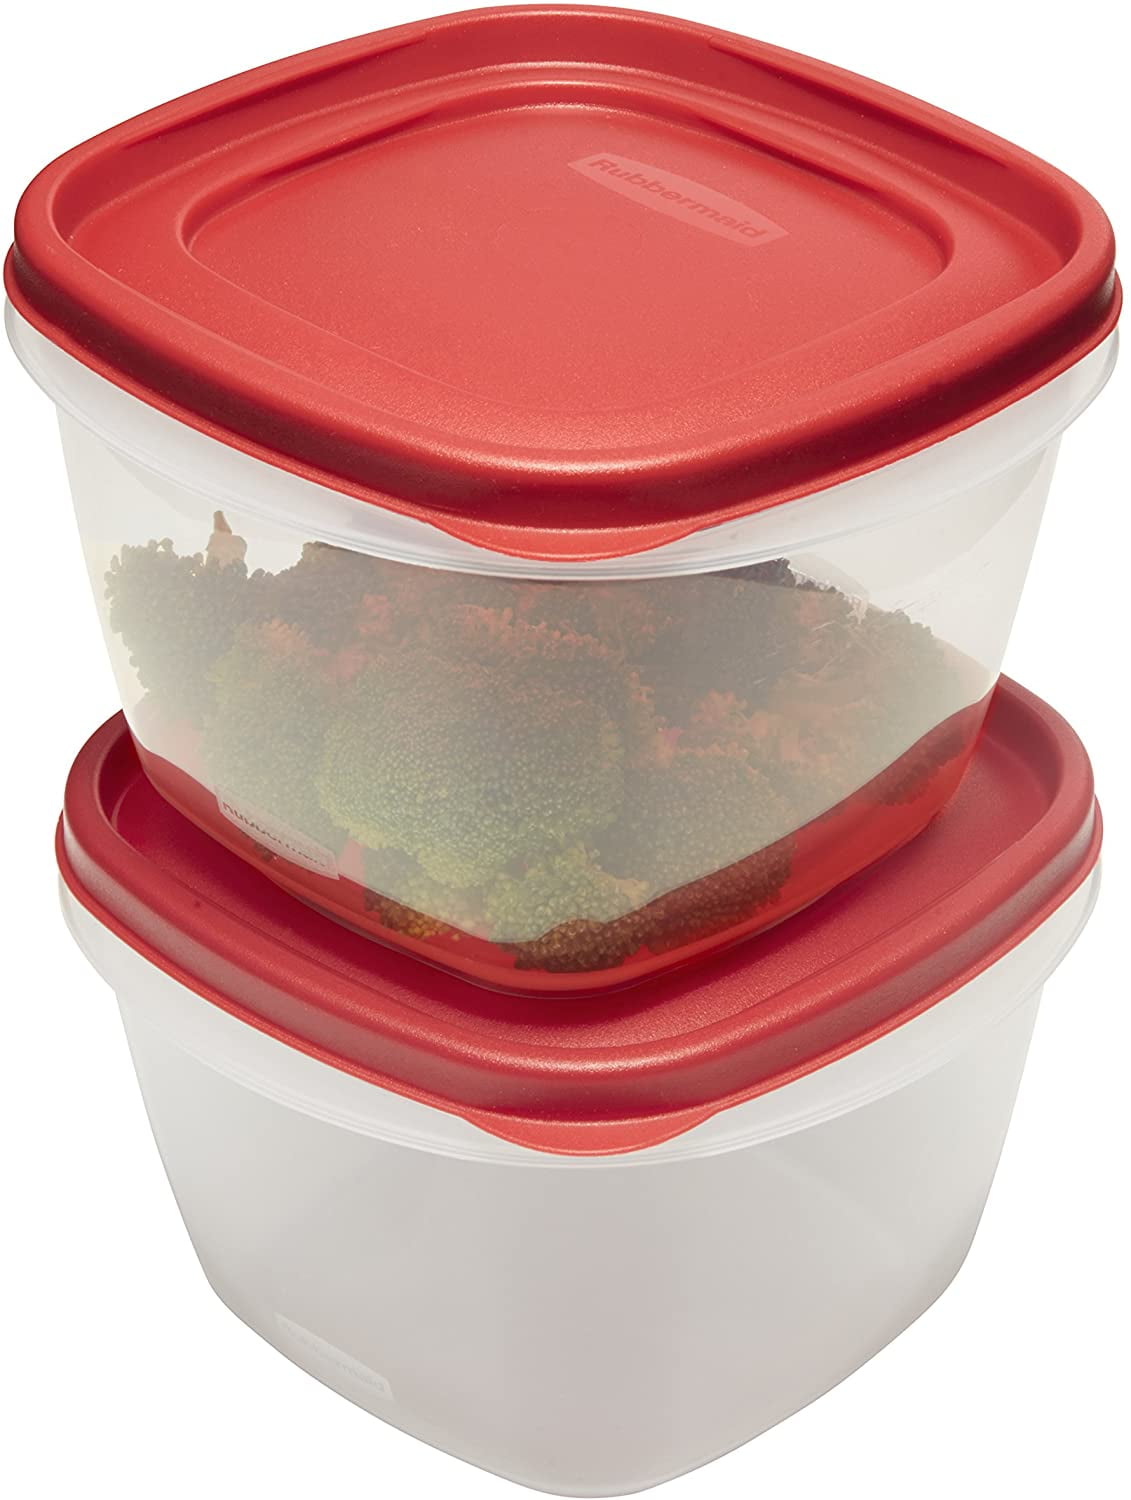 Set of 2 Rubbermaid Servin' Saver Rectangular Storage Containers Almond  Lids 6 7 Cups and 9 12 Cups 